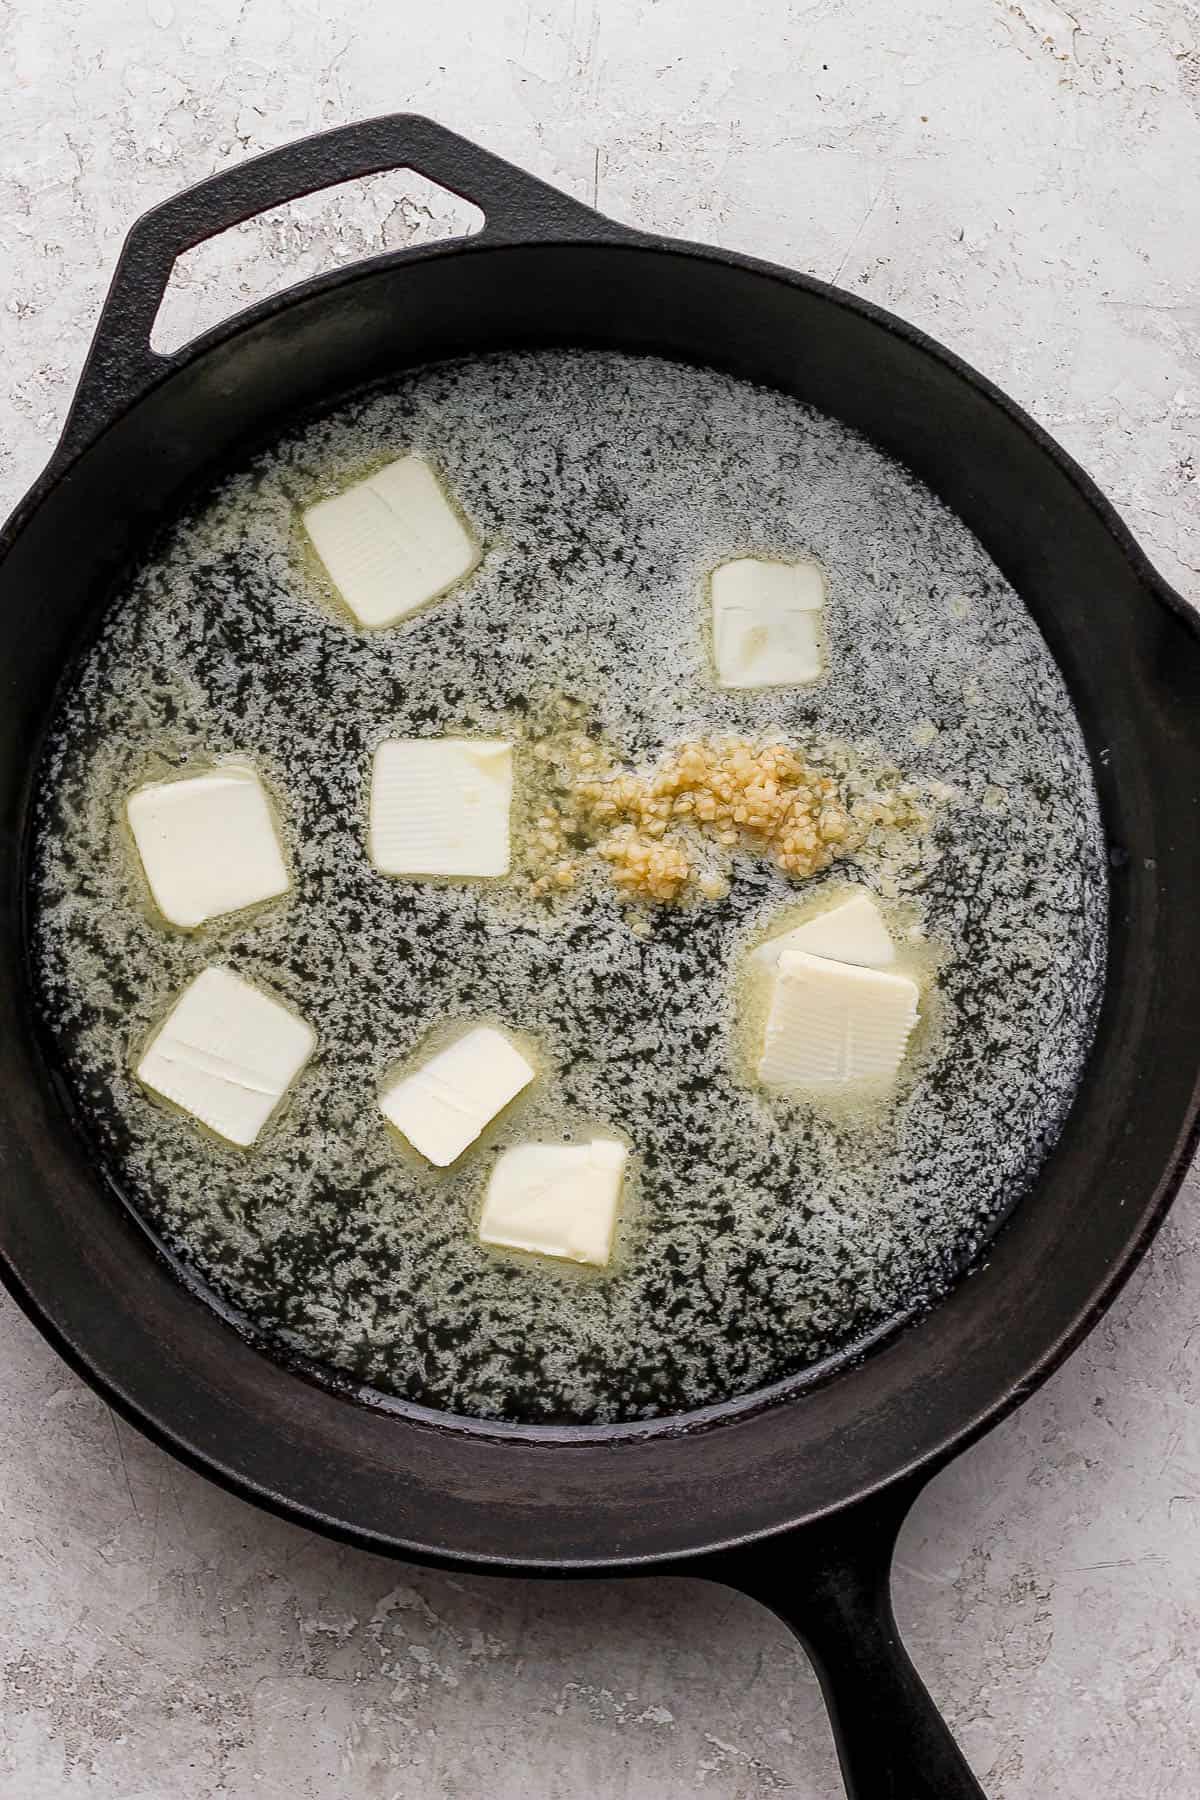 Butter melting in a cast iron skillet with minced garlic added to the pan.